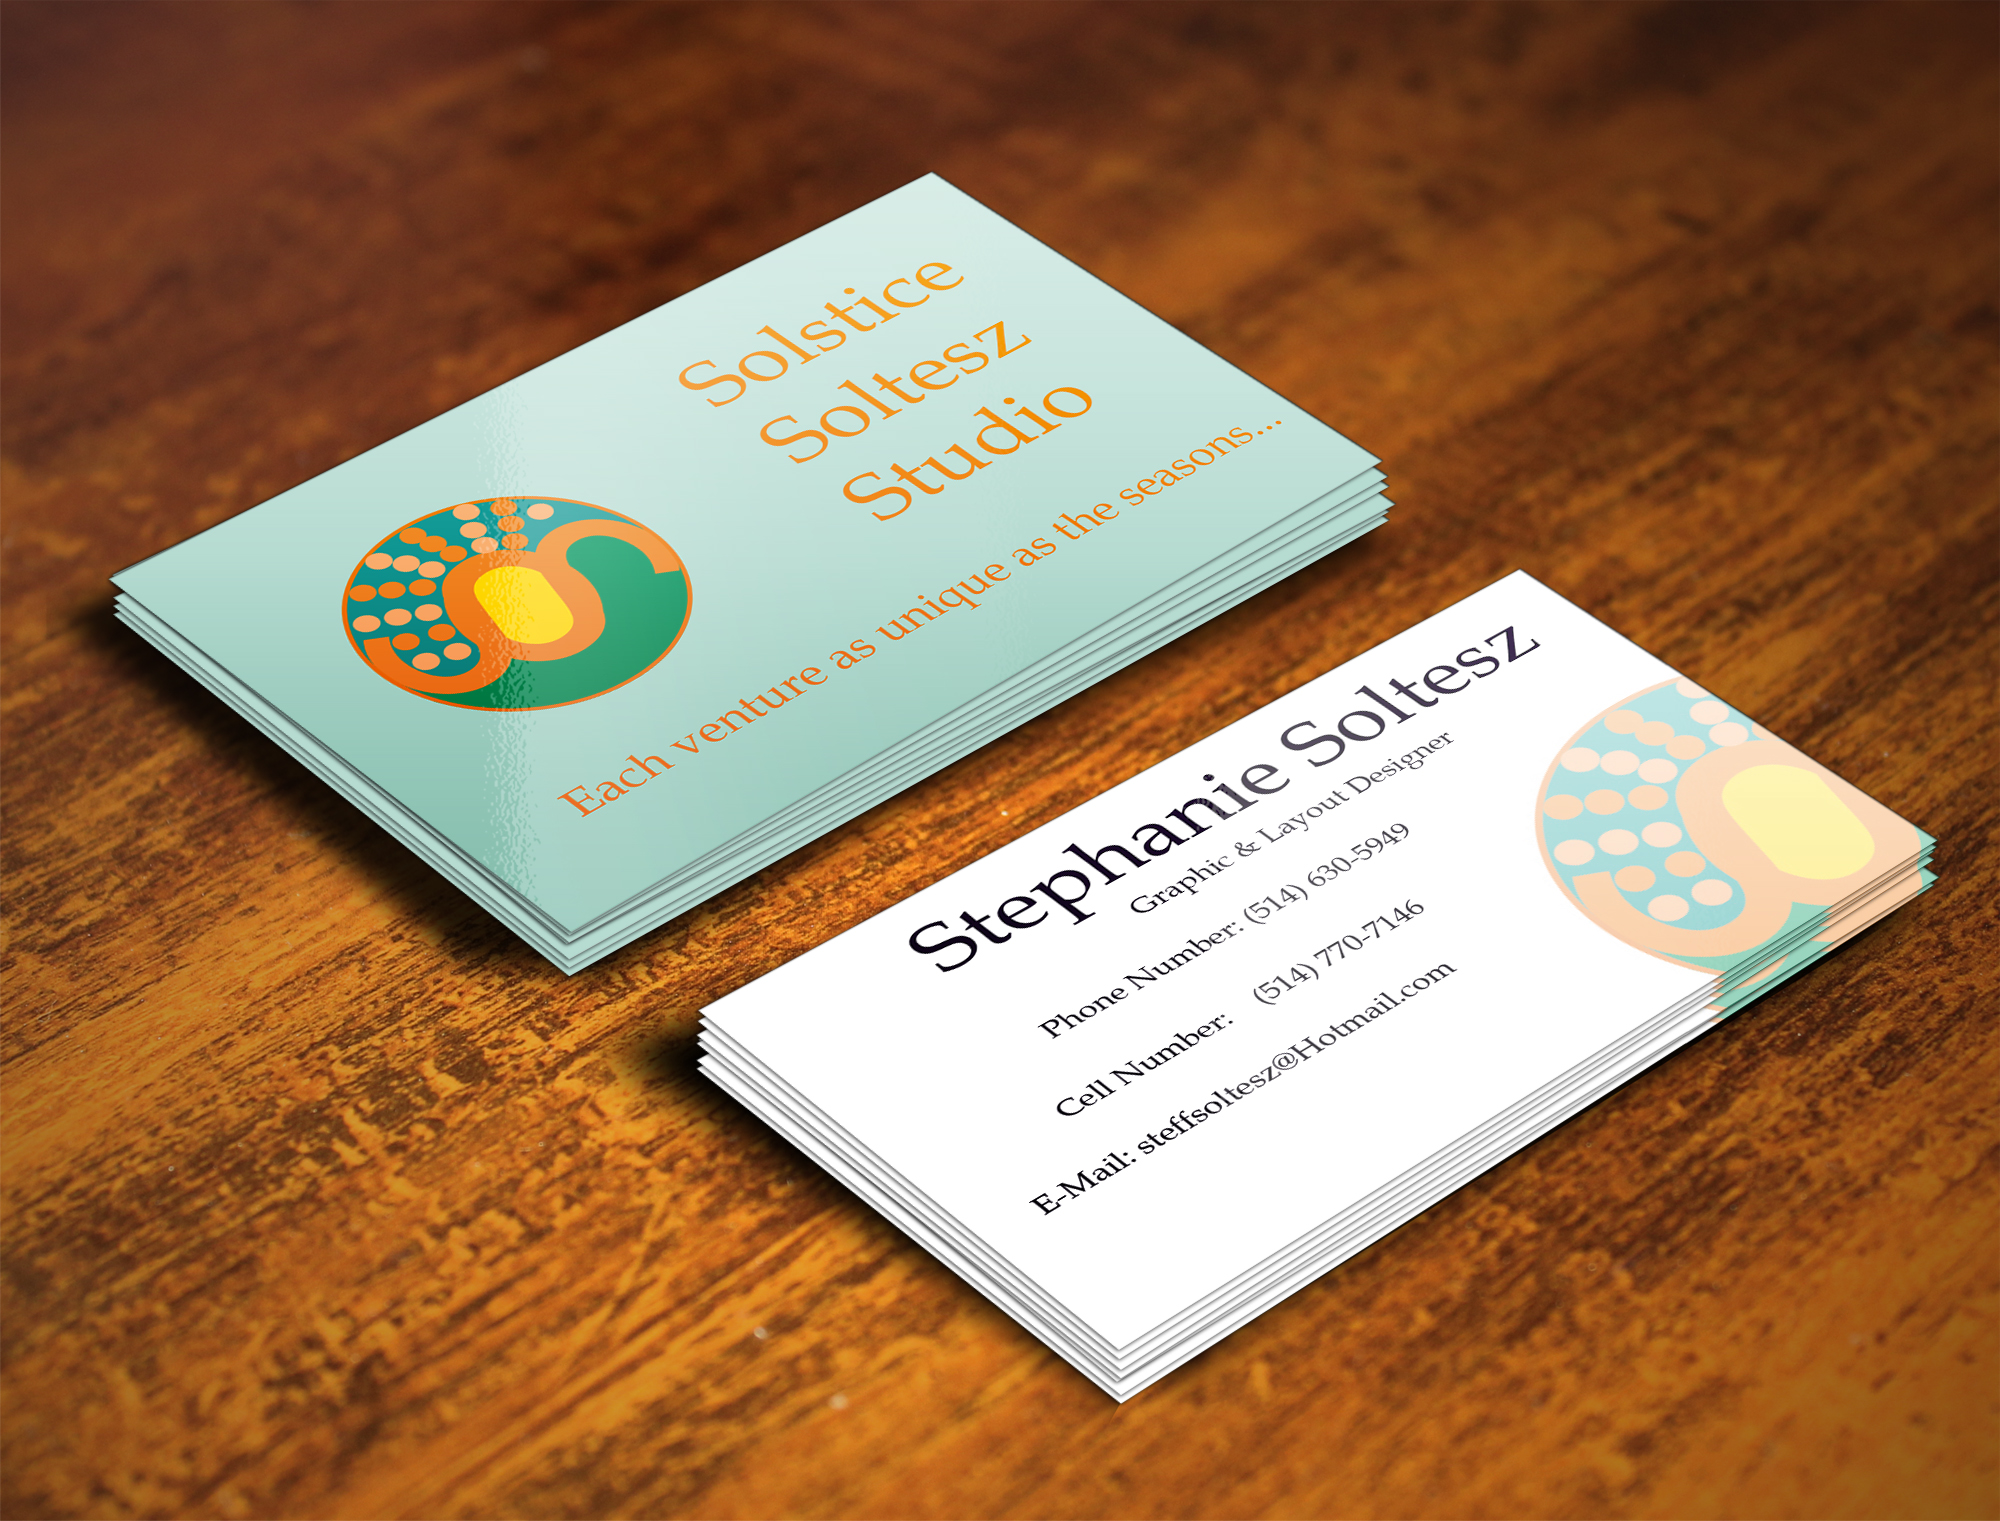 personal business cards